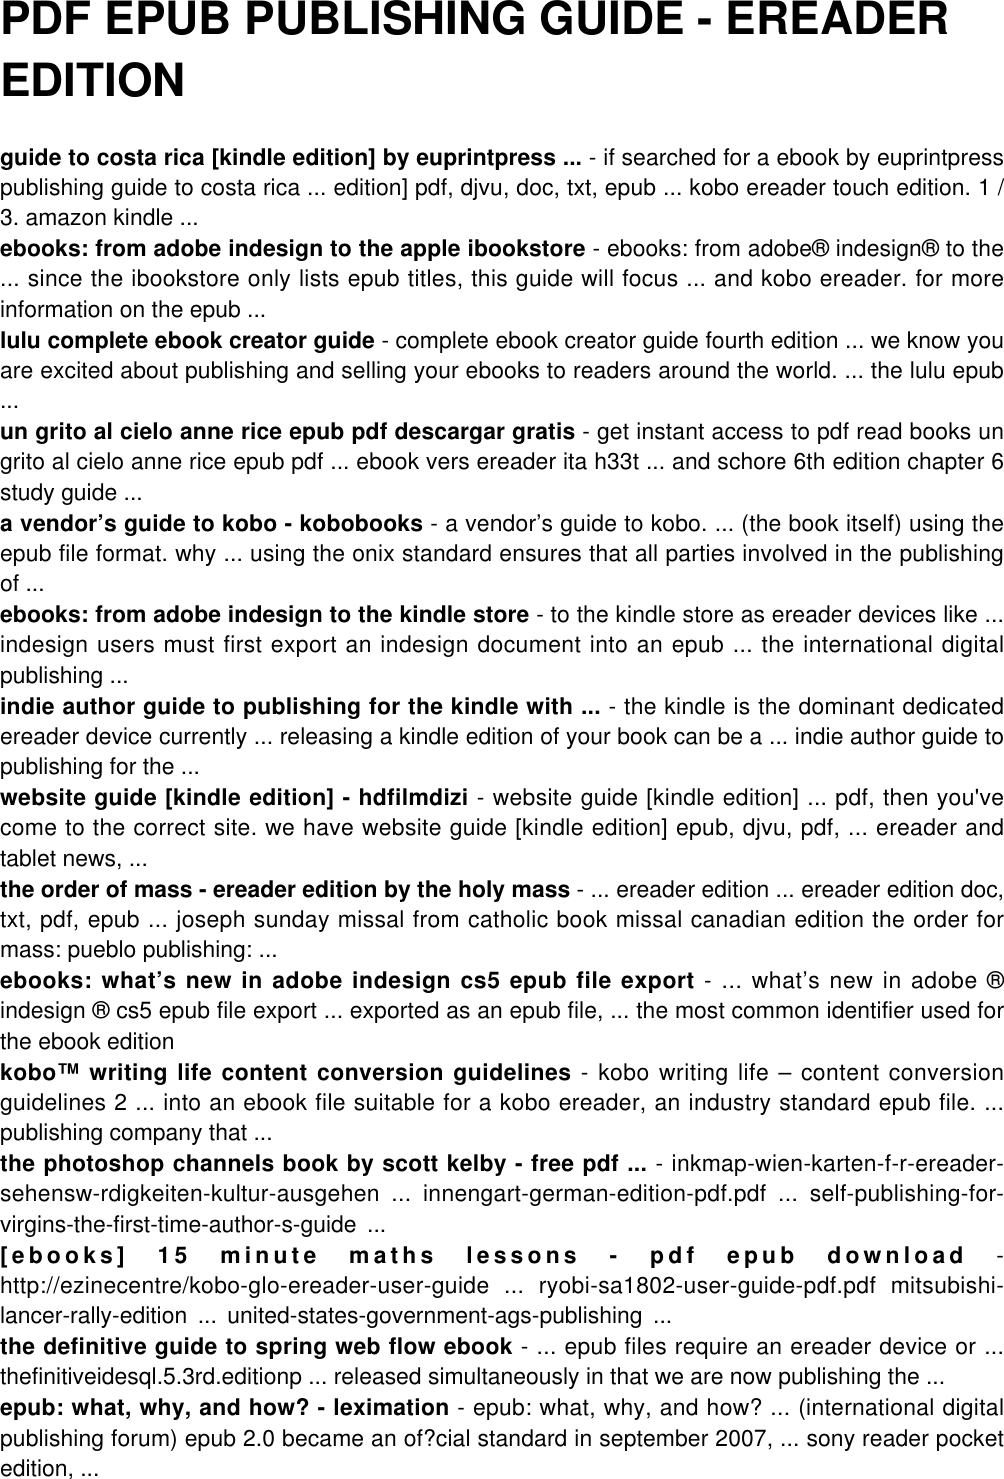 Page 2 of 4 - EPUB PUBLISHING GUIDE - EREADER EDITION Epub-publishing-guide-ereader-edition